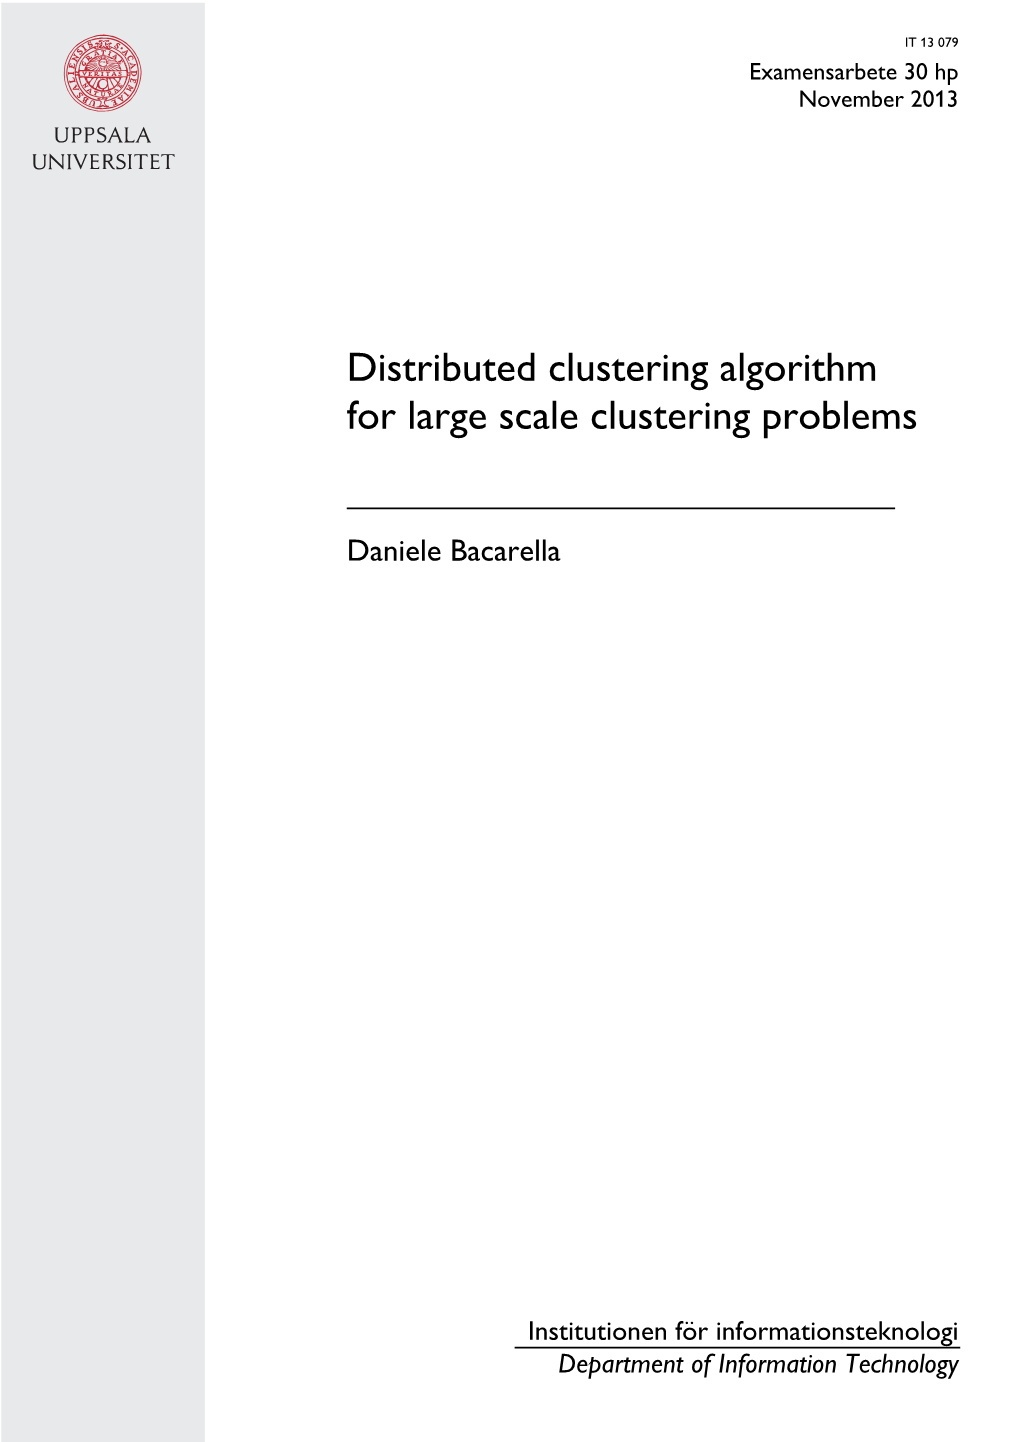 Distributed Clustering Algorithm for Large Scale Clustering Problems